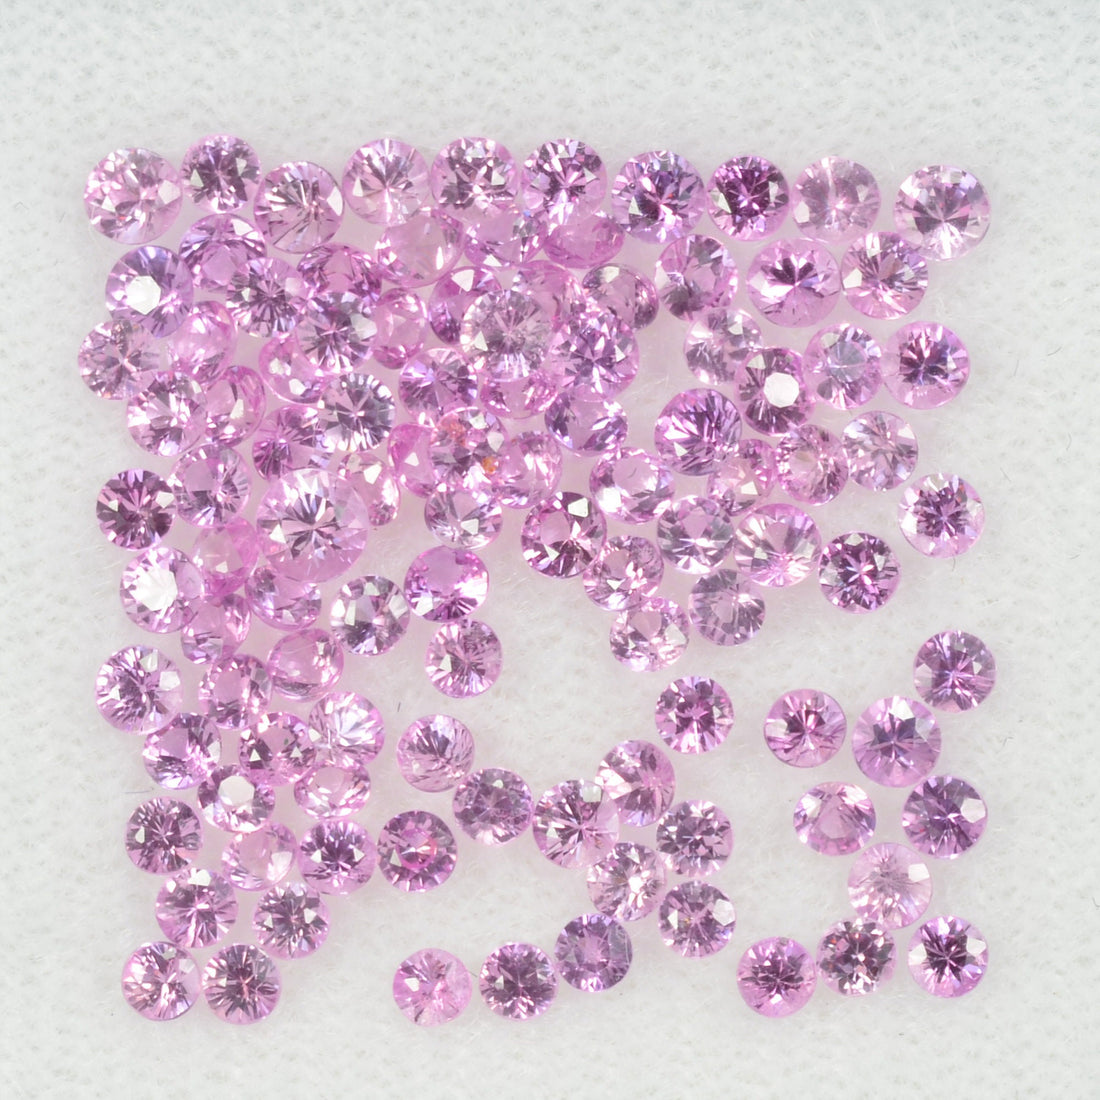 2.0 mm Natural Pink Sapphire Loose Gemstone Round Diamond Cut Cleanish Quality Color